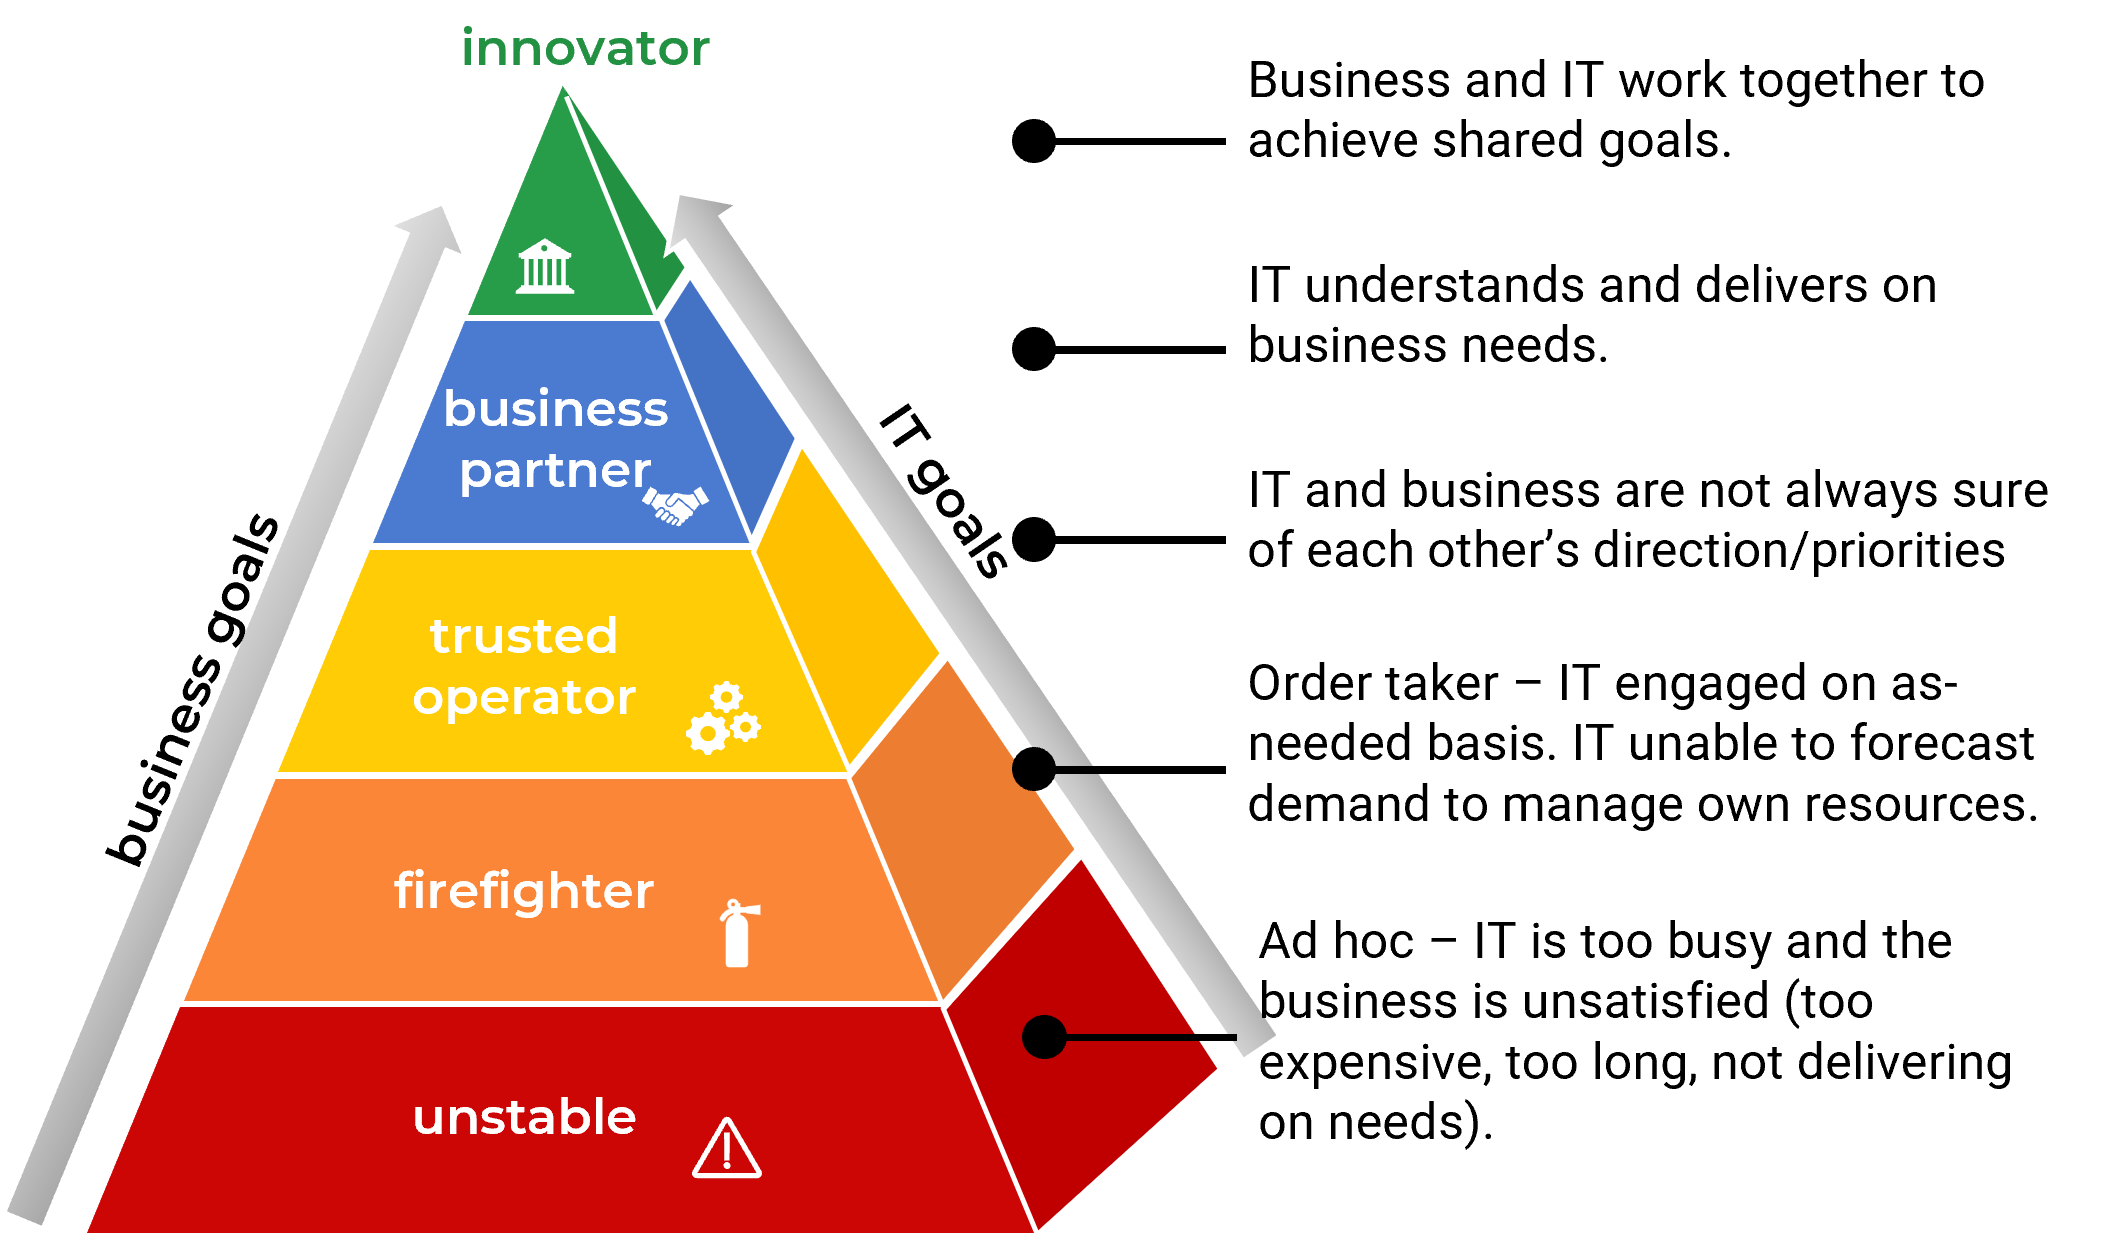 IT Maturity Pyramid with 'business goals' and 'IT goals' moving upward along its sides. It has five levels, 'unstable - Ad hoc – IT is too busy and the business is unsatisfied (too expensive, too long, not delivering on needs)', 'firefighter - Order taker – IT engaged on as-needed basis. IT unable to forecast demand to manage own resources', 'trusted operator - IT and business are not always sure of each other’s direction/priorities’, ‘business partner - IT understands and delivers on business needs', and 'innovator - Business and IT work together to achieve shared goals'.